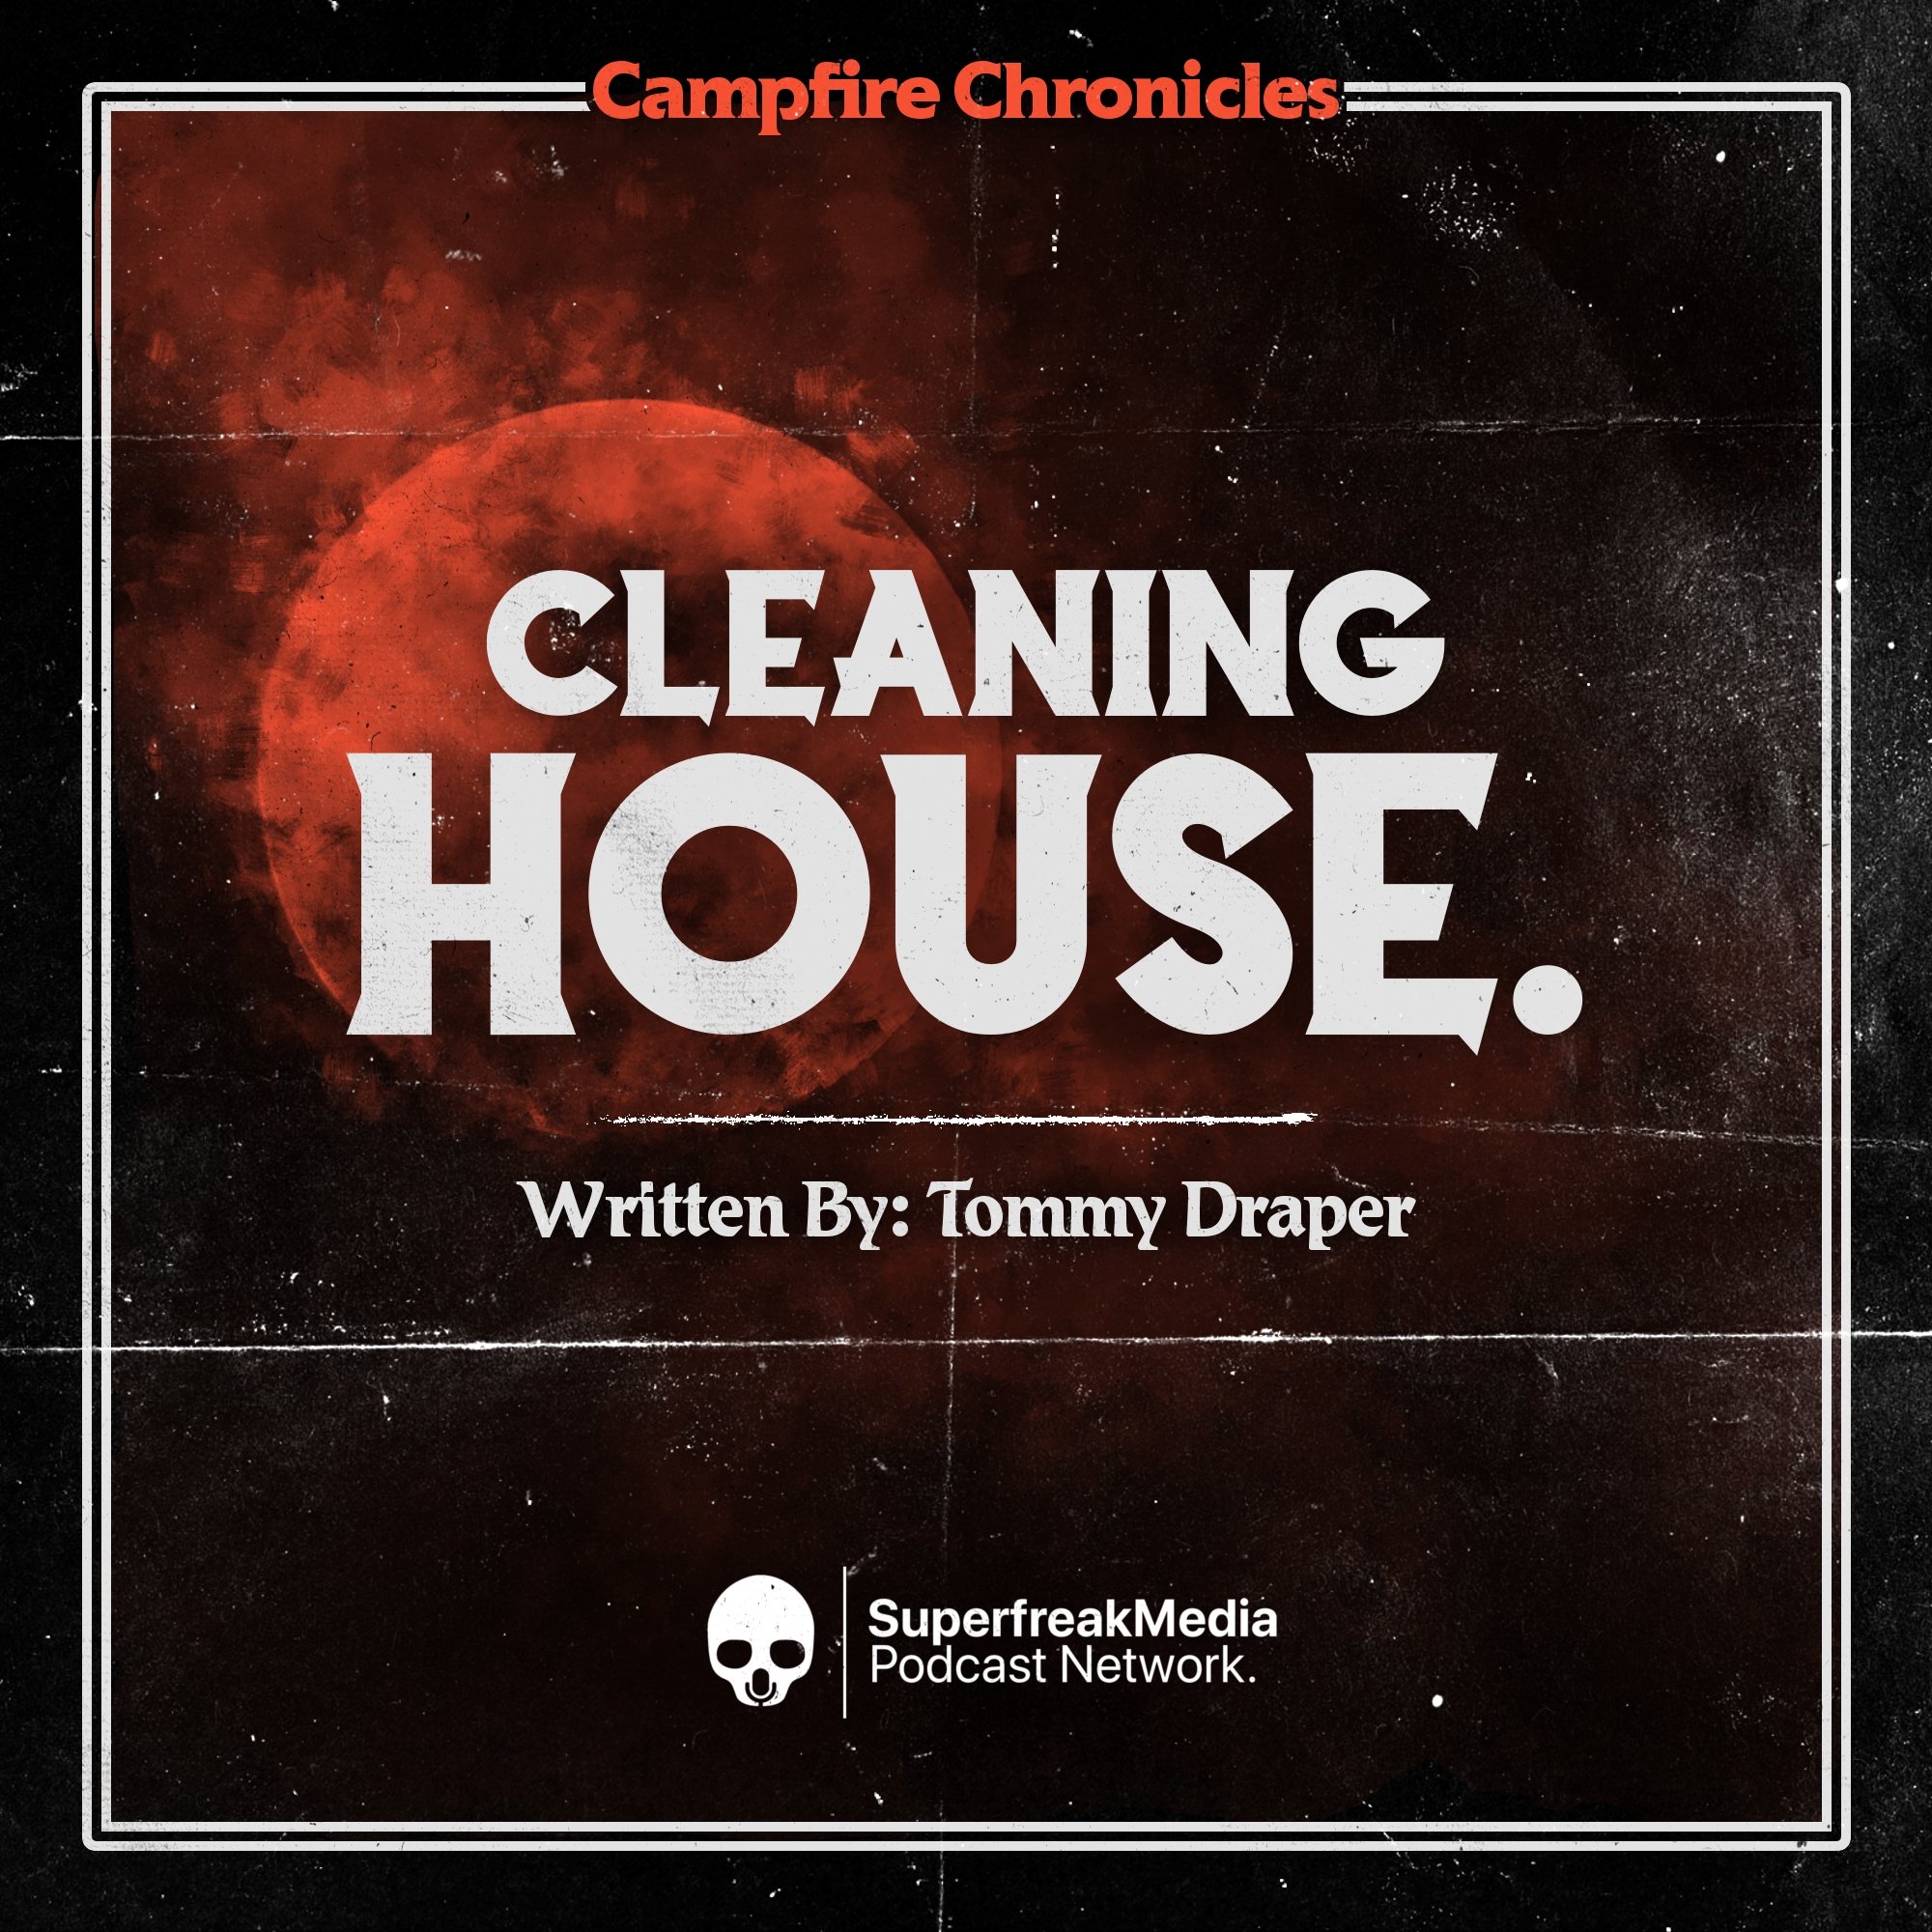 CC - Cleaning House Cover.jpg